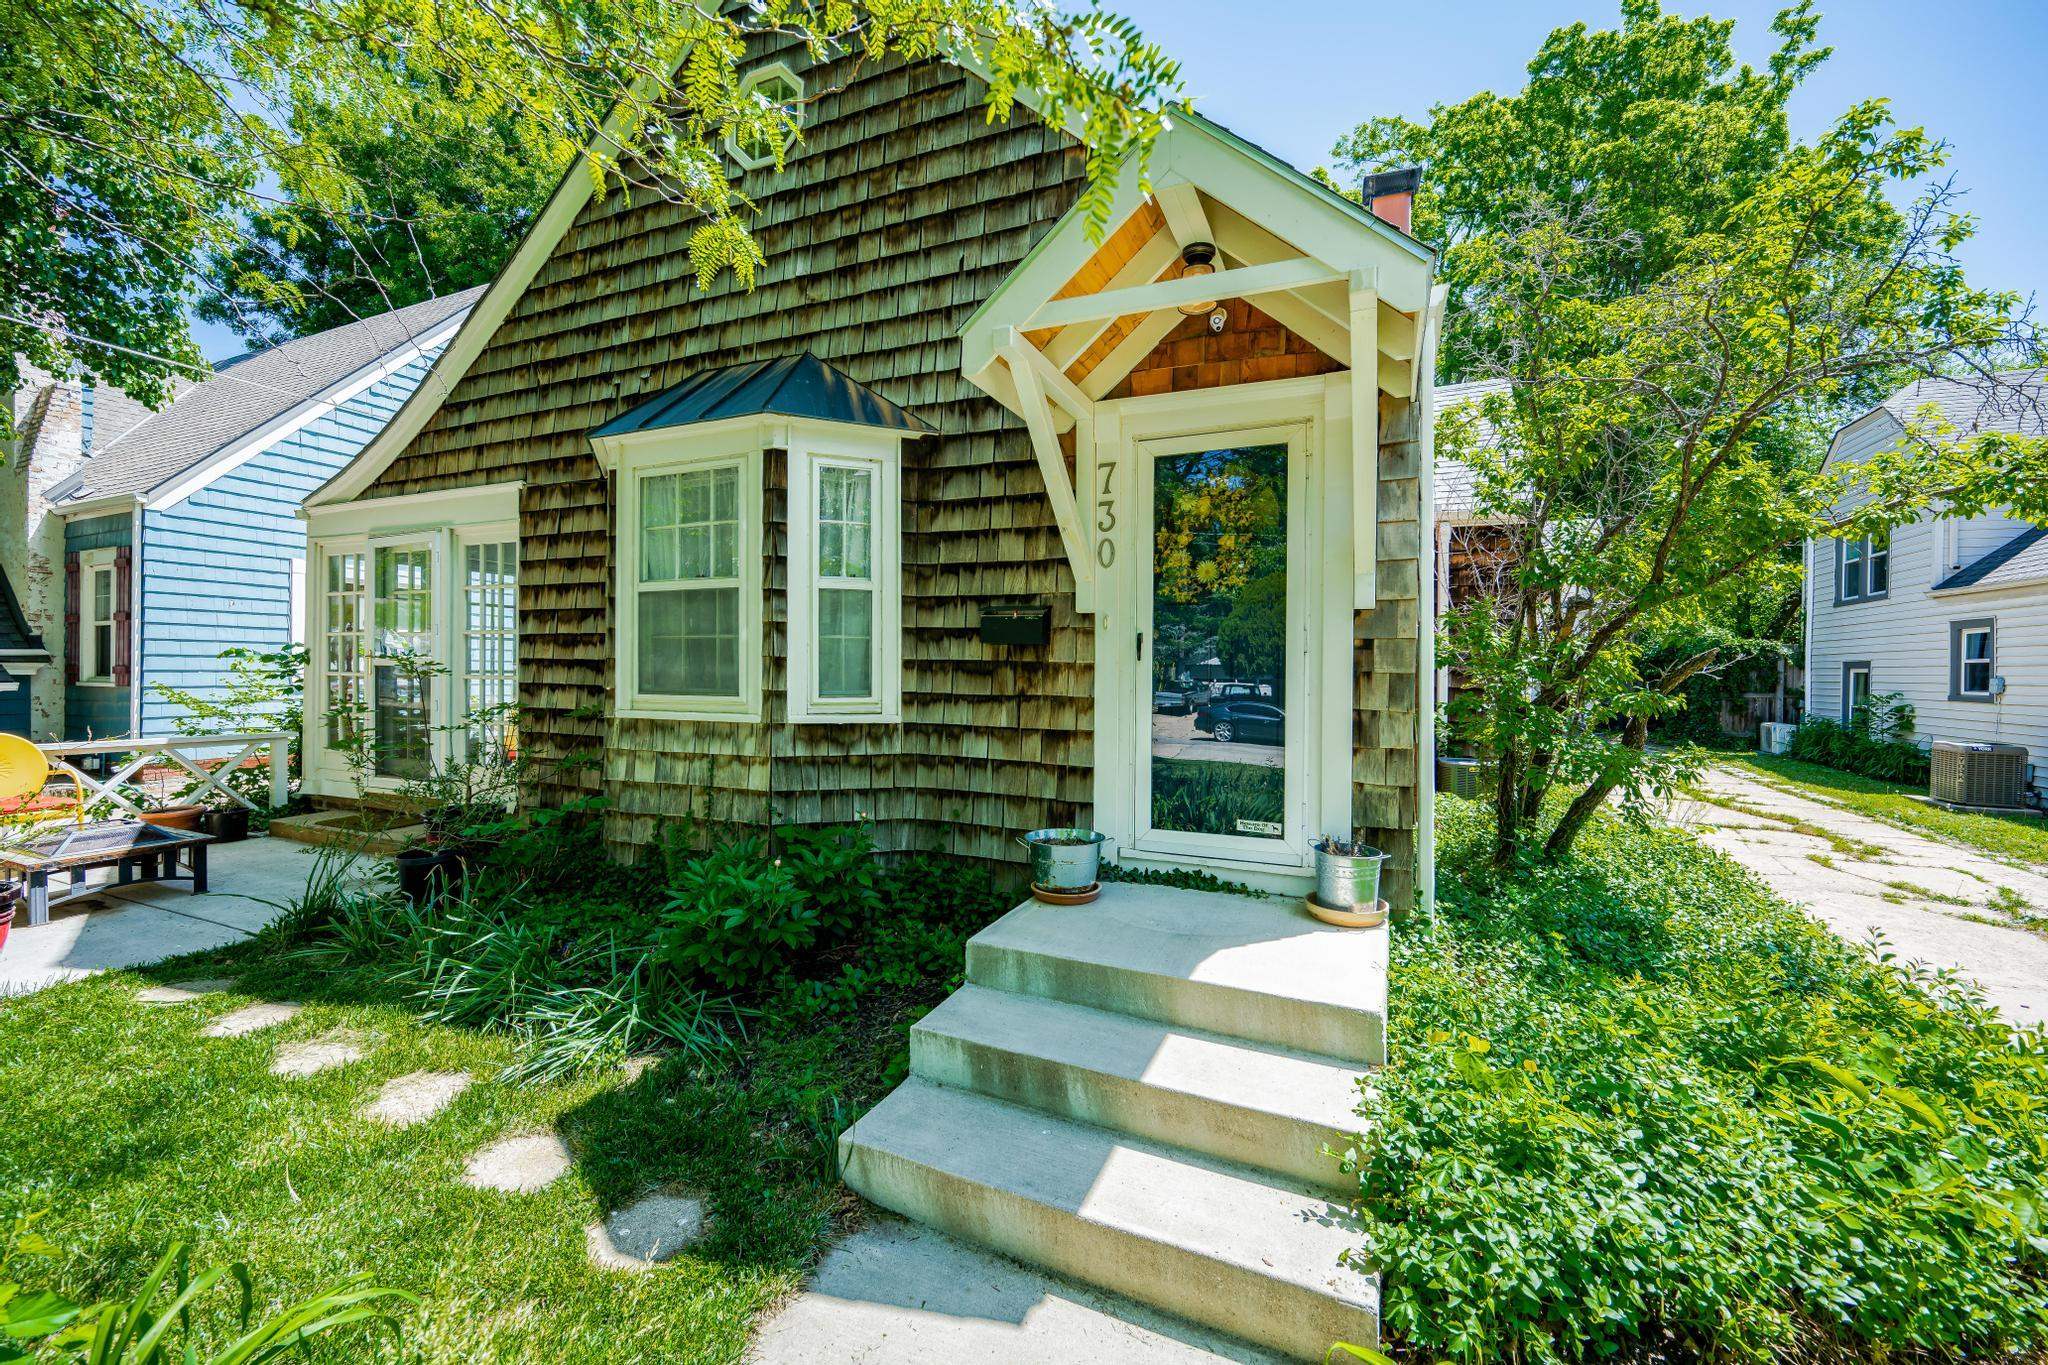 Look no further, you are HOME!  This adorable cottage style home is tucked away in the Sleepy Hollow